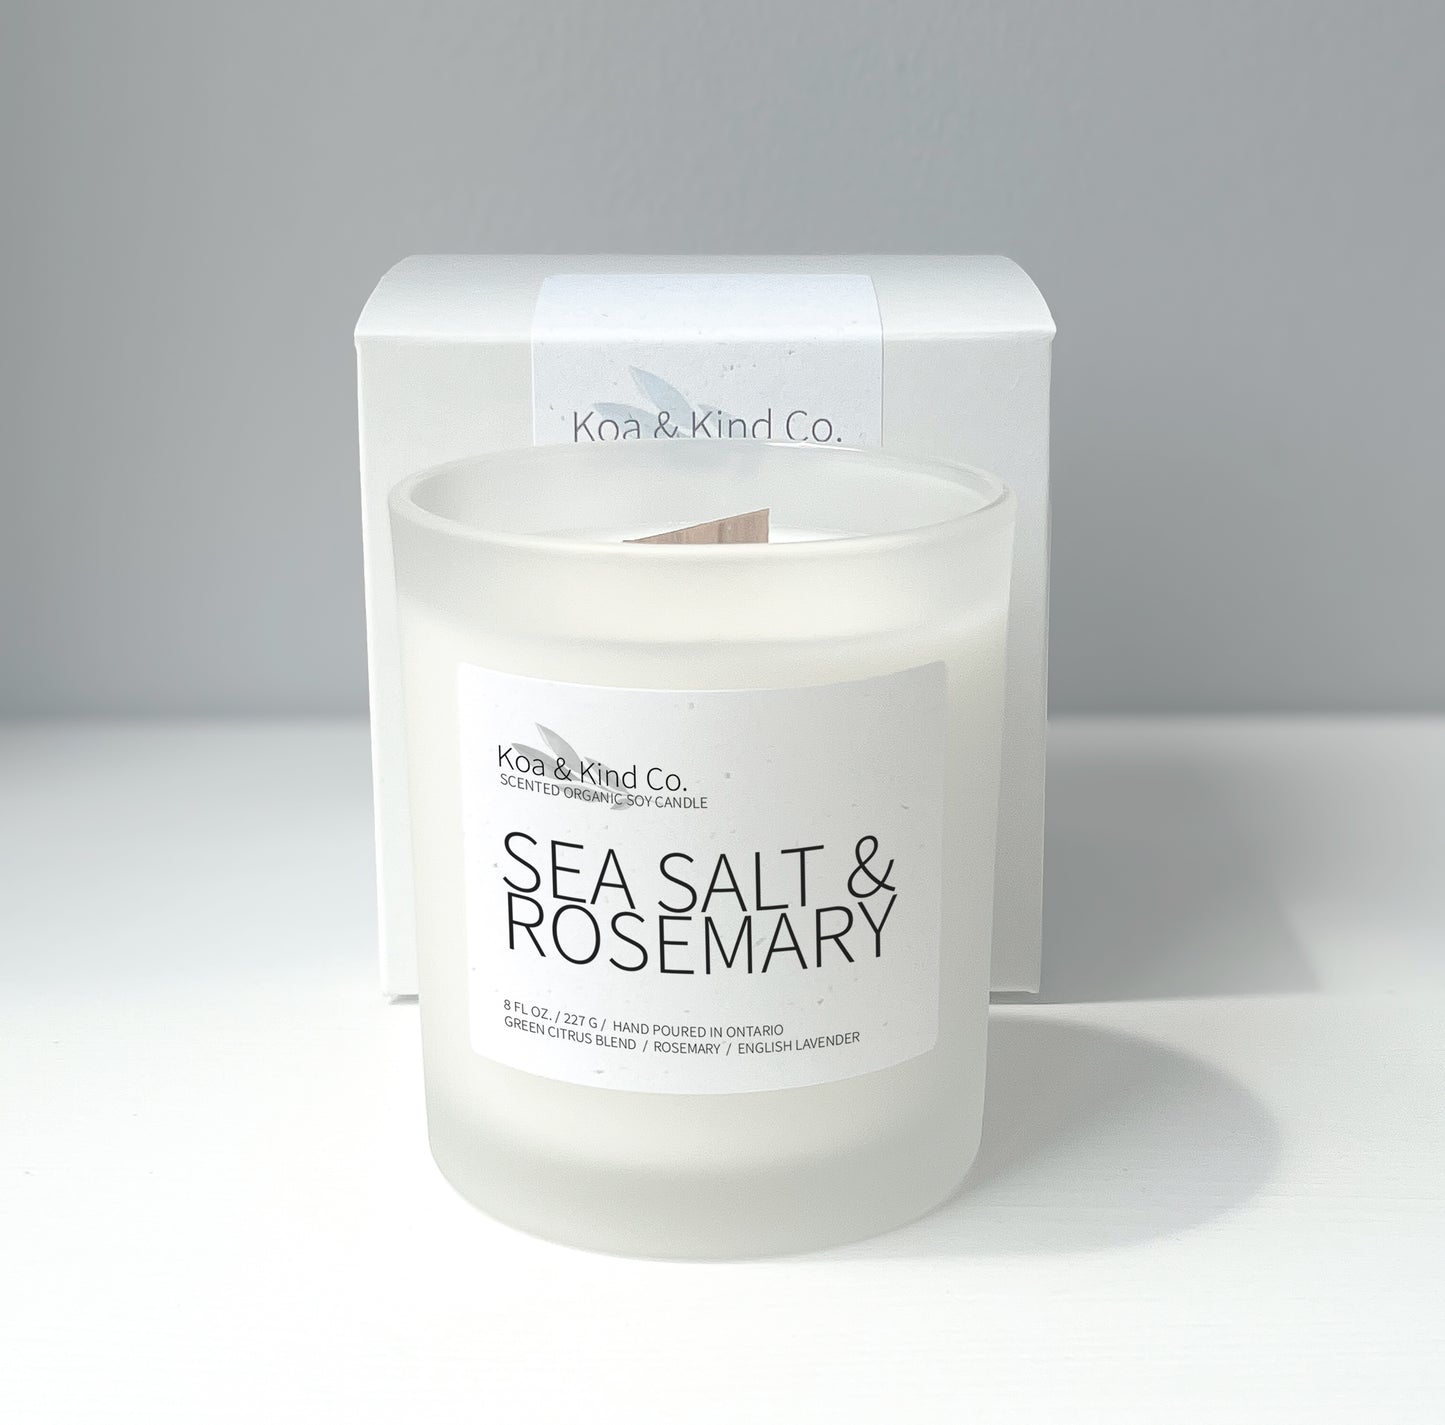 Sea Salt & Rosemary Scented Soy Candle